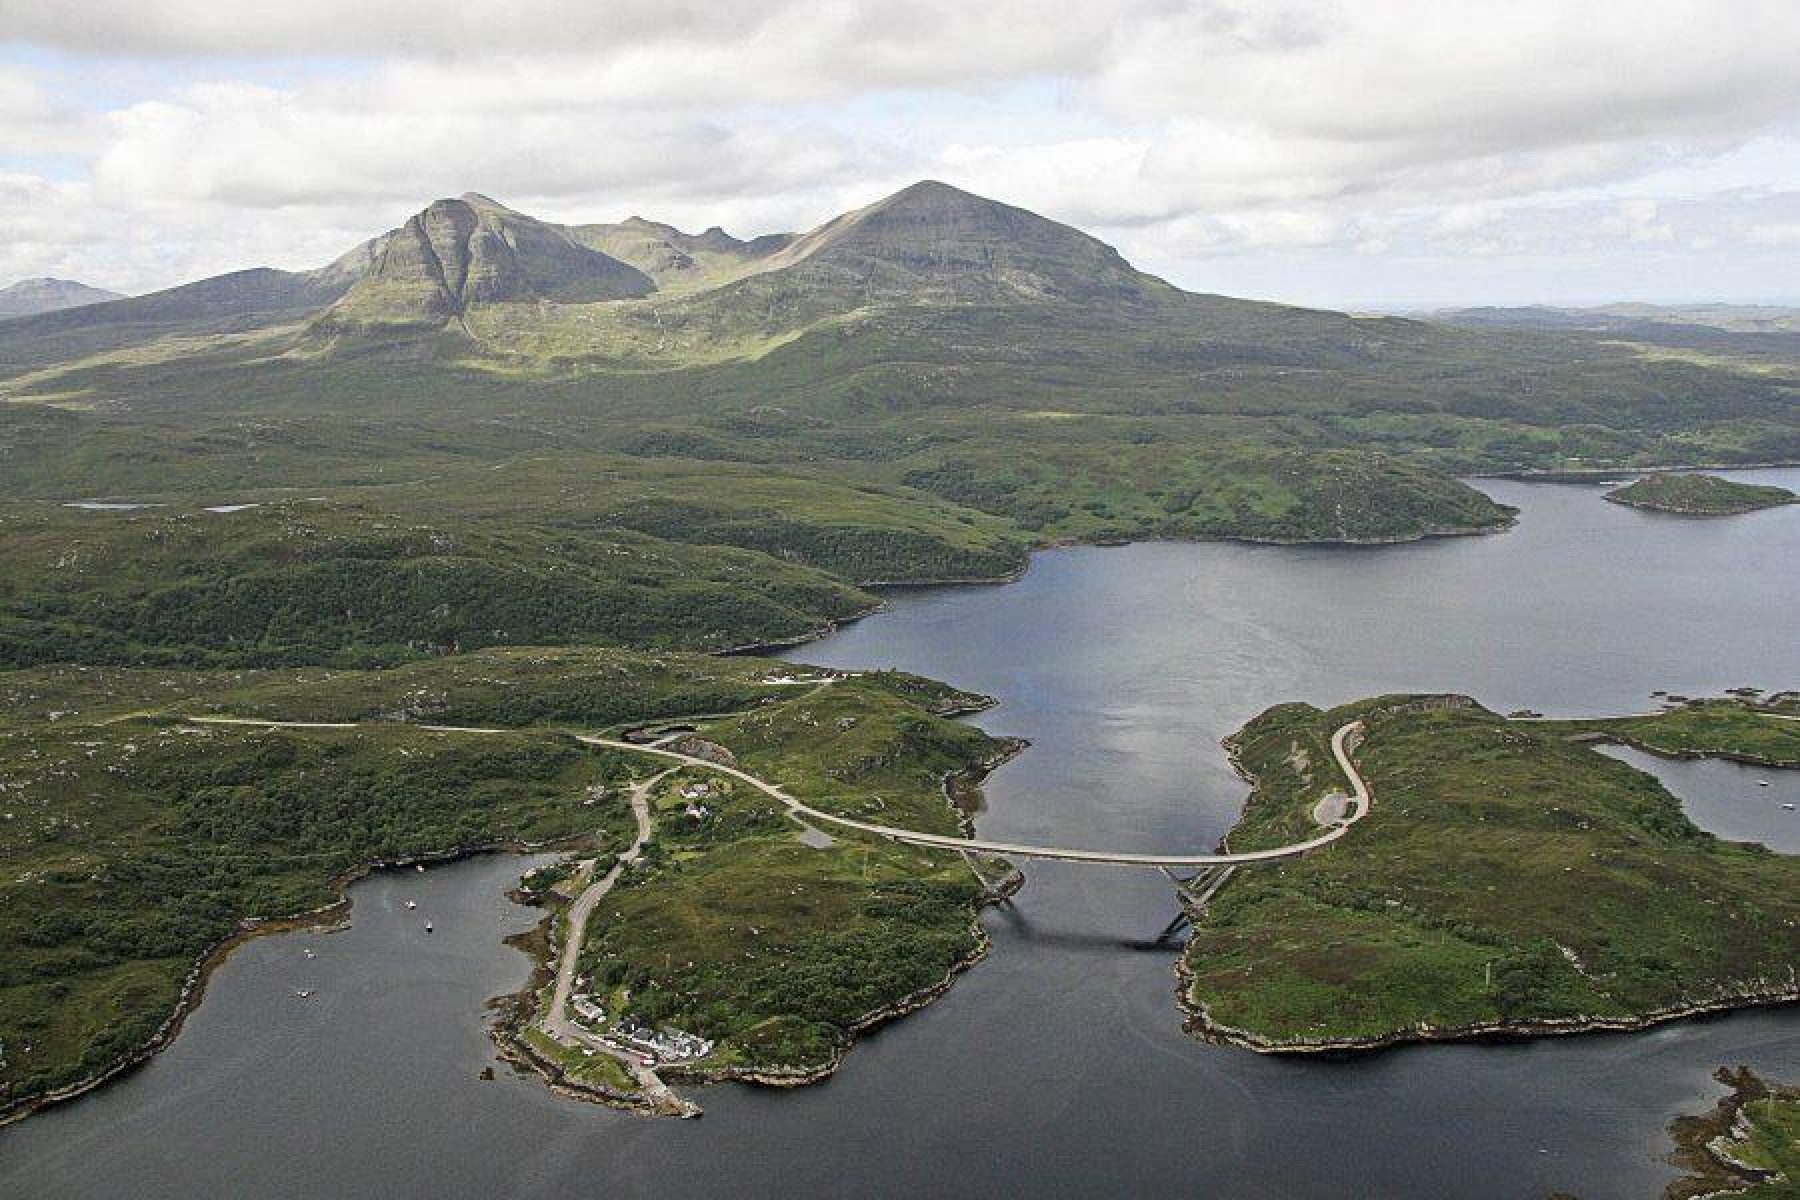 An aerial view of the Kylesku Bridge in the Scottish Highlands